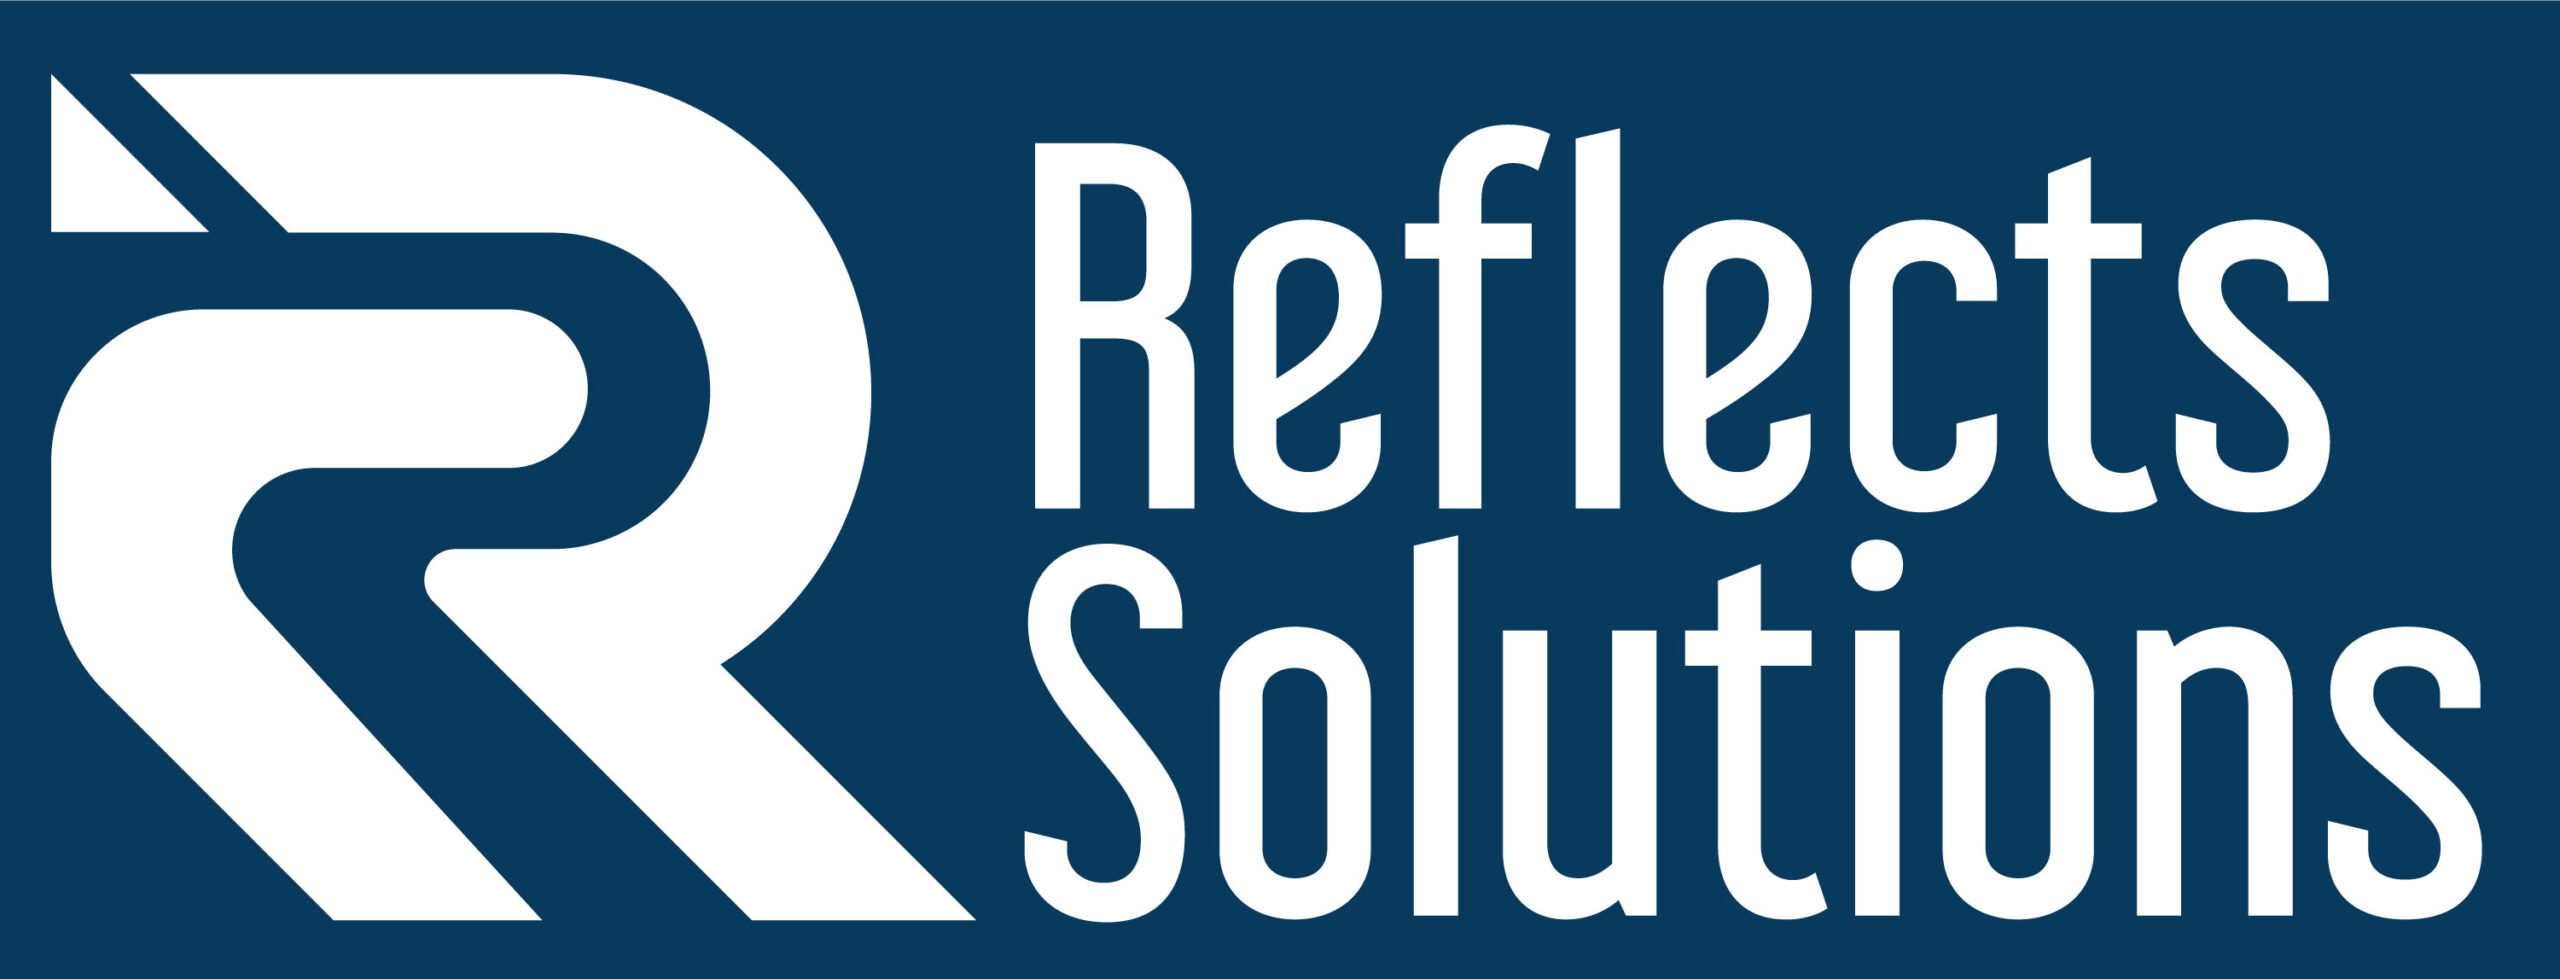 Reflects Solutions International Limited